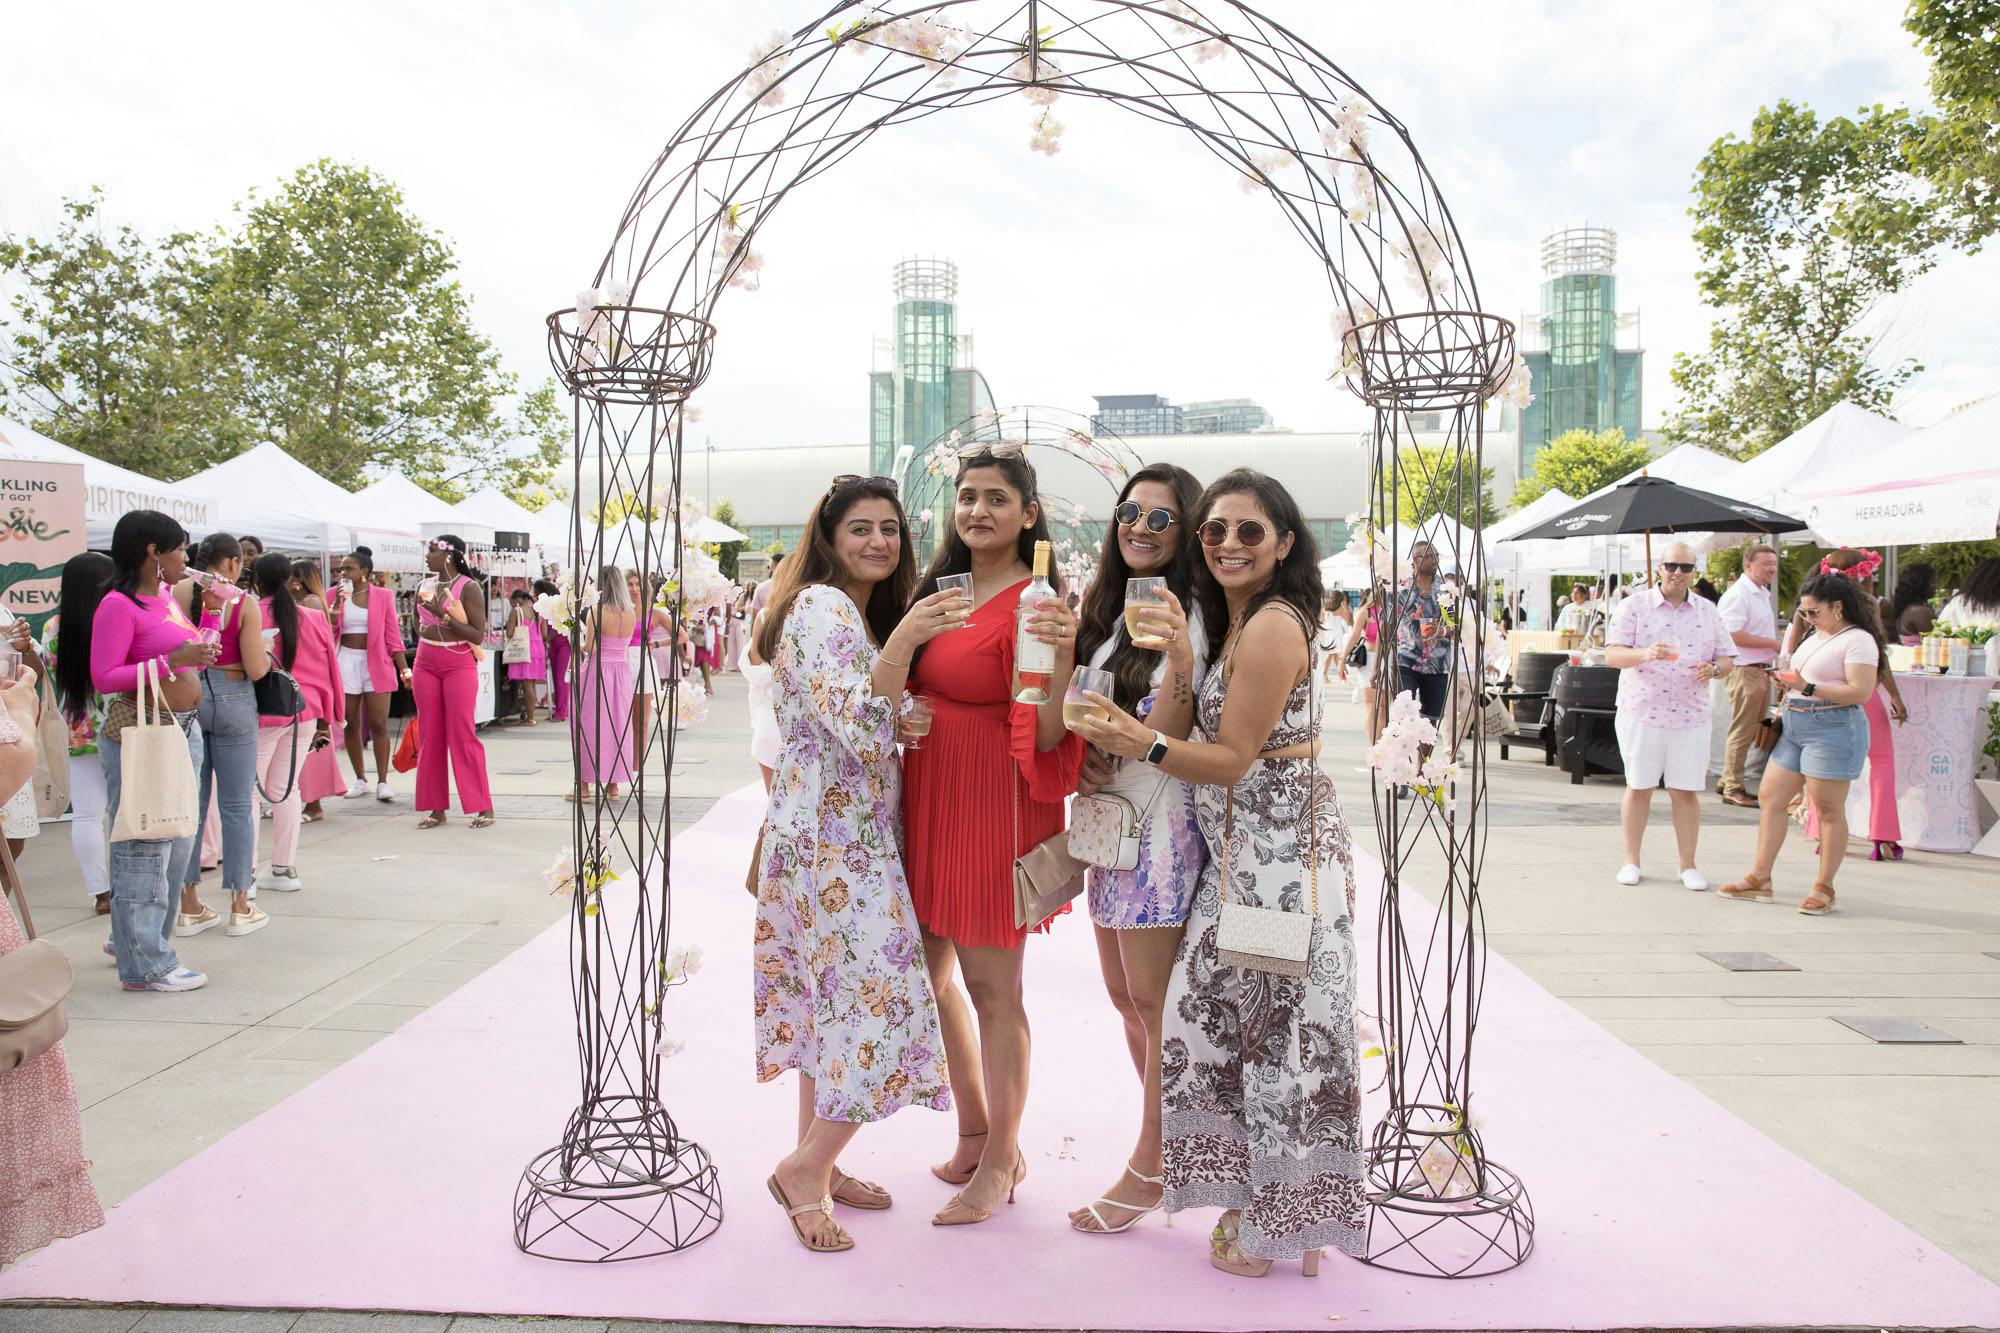 Experience Toronto's Premium Picnic Weekend: Reserve Your Exclusive Tickets Today!